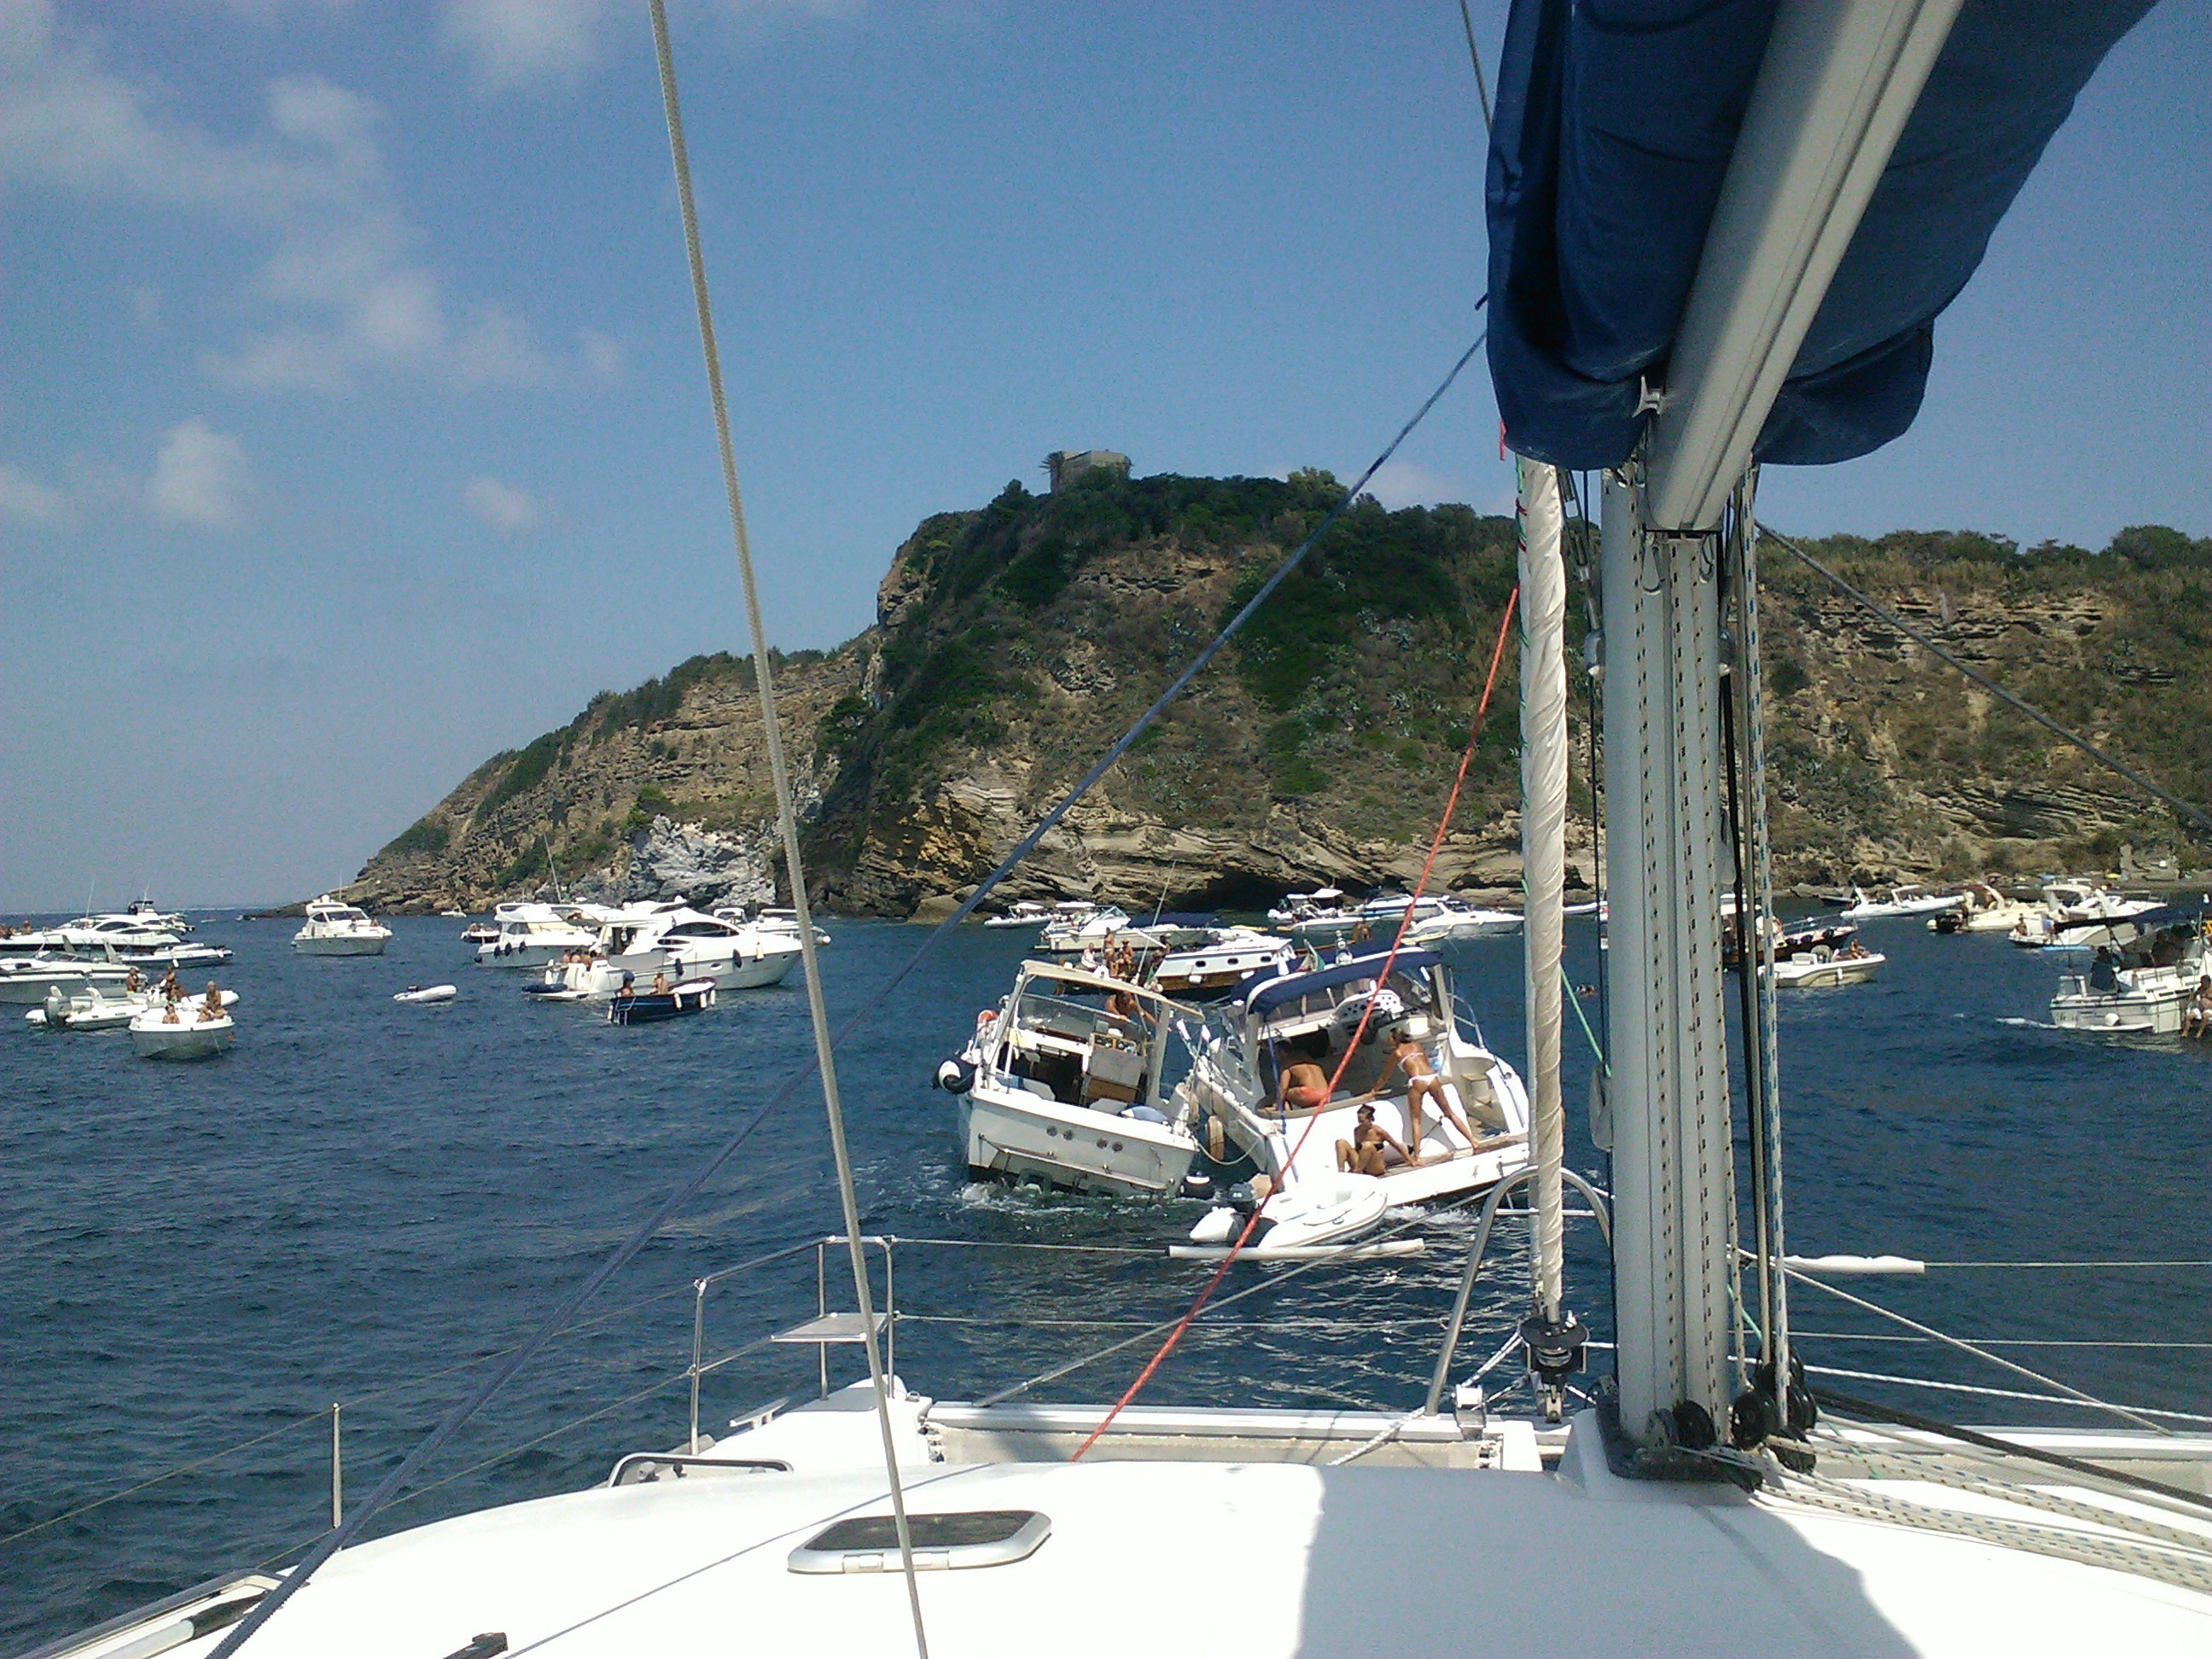 Crowded anchorages in Italy